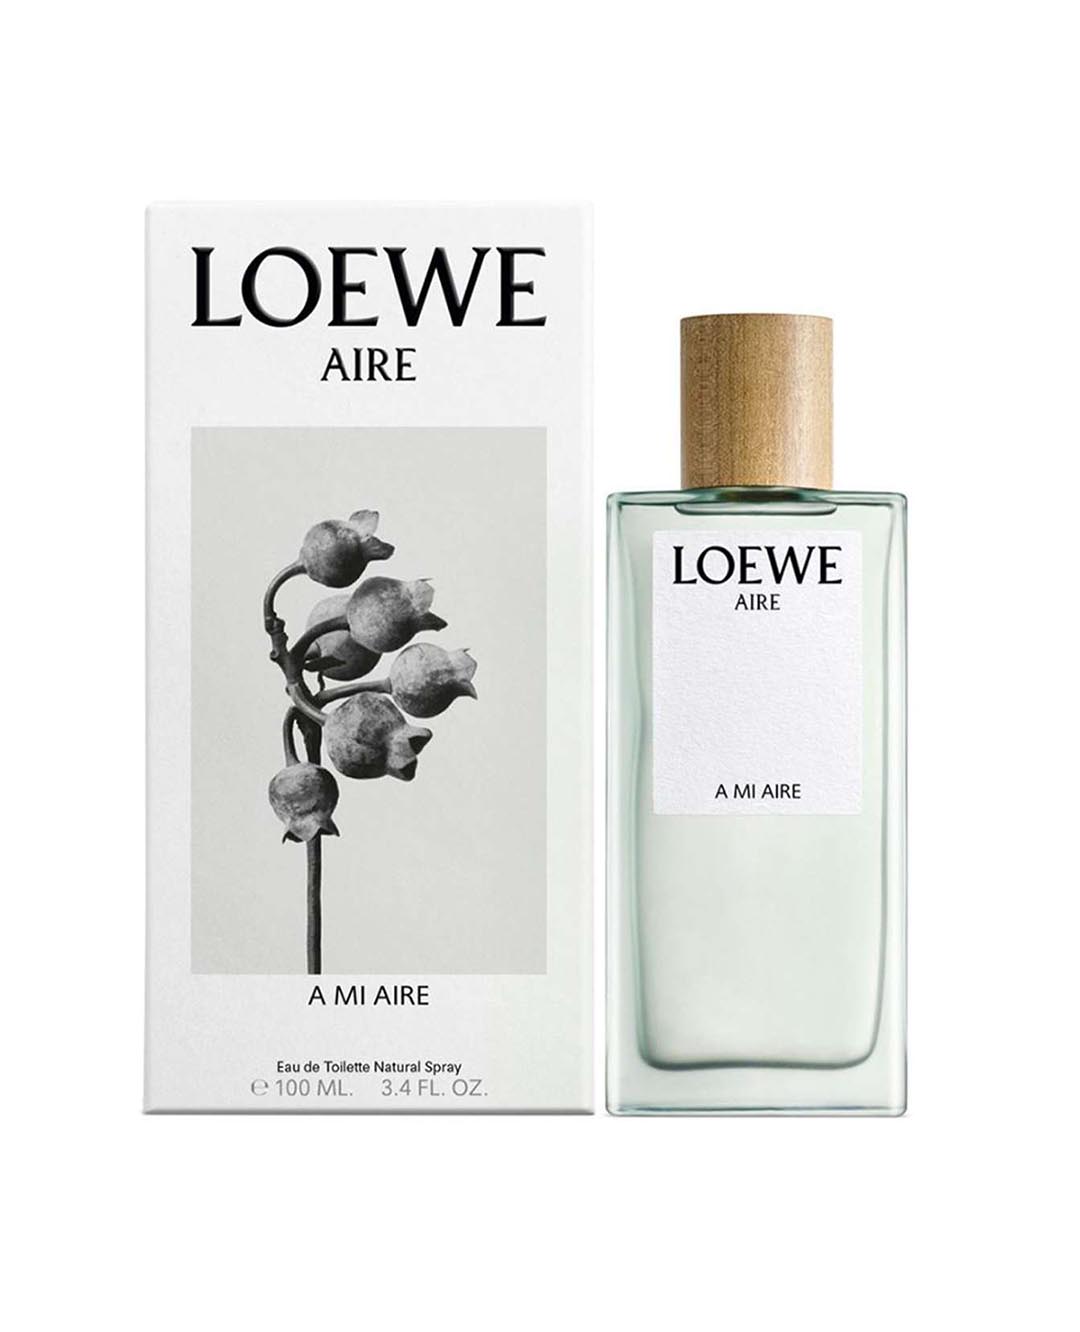 scent_0003_Faradays_0012_LOEWE-AIRE-A-MI-AIRE